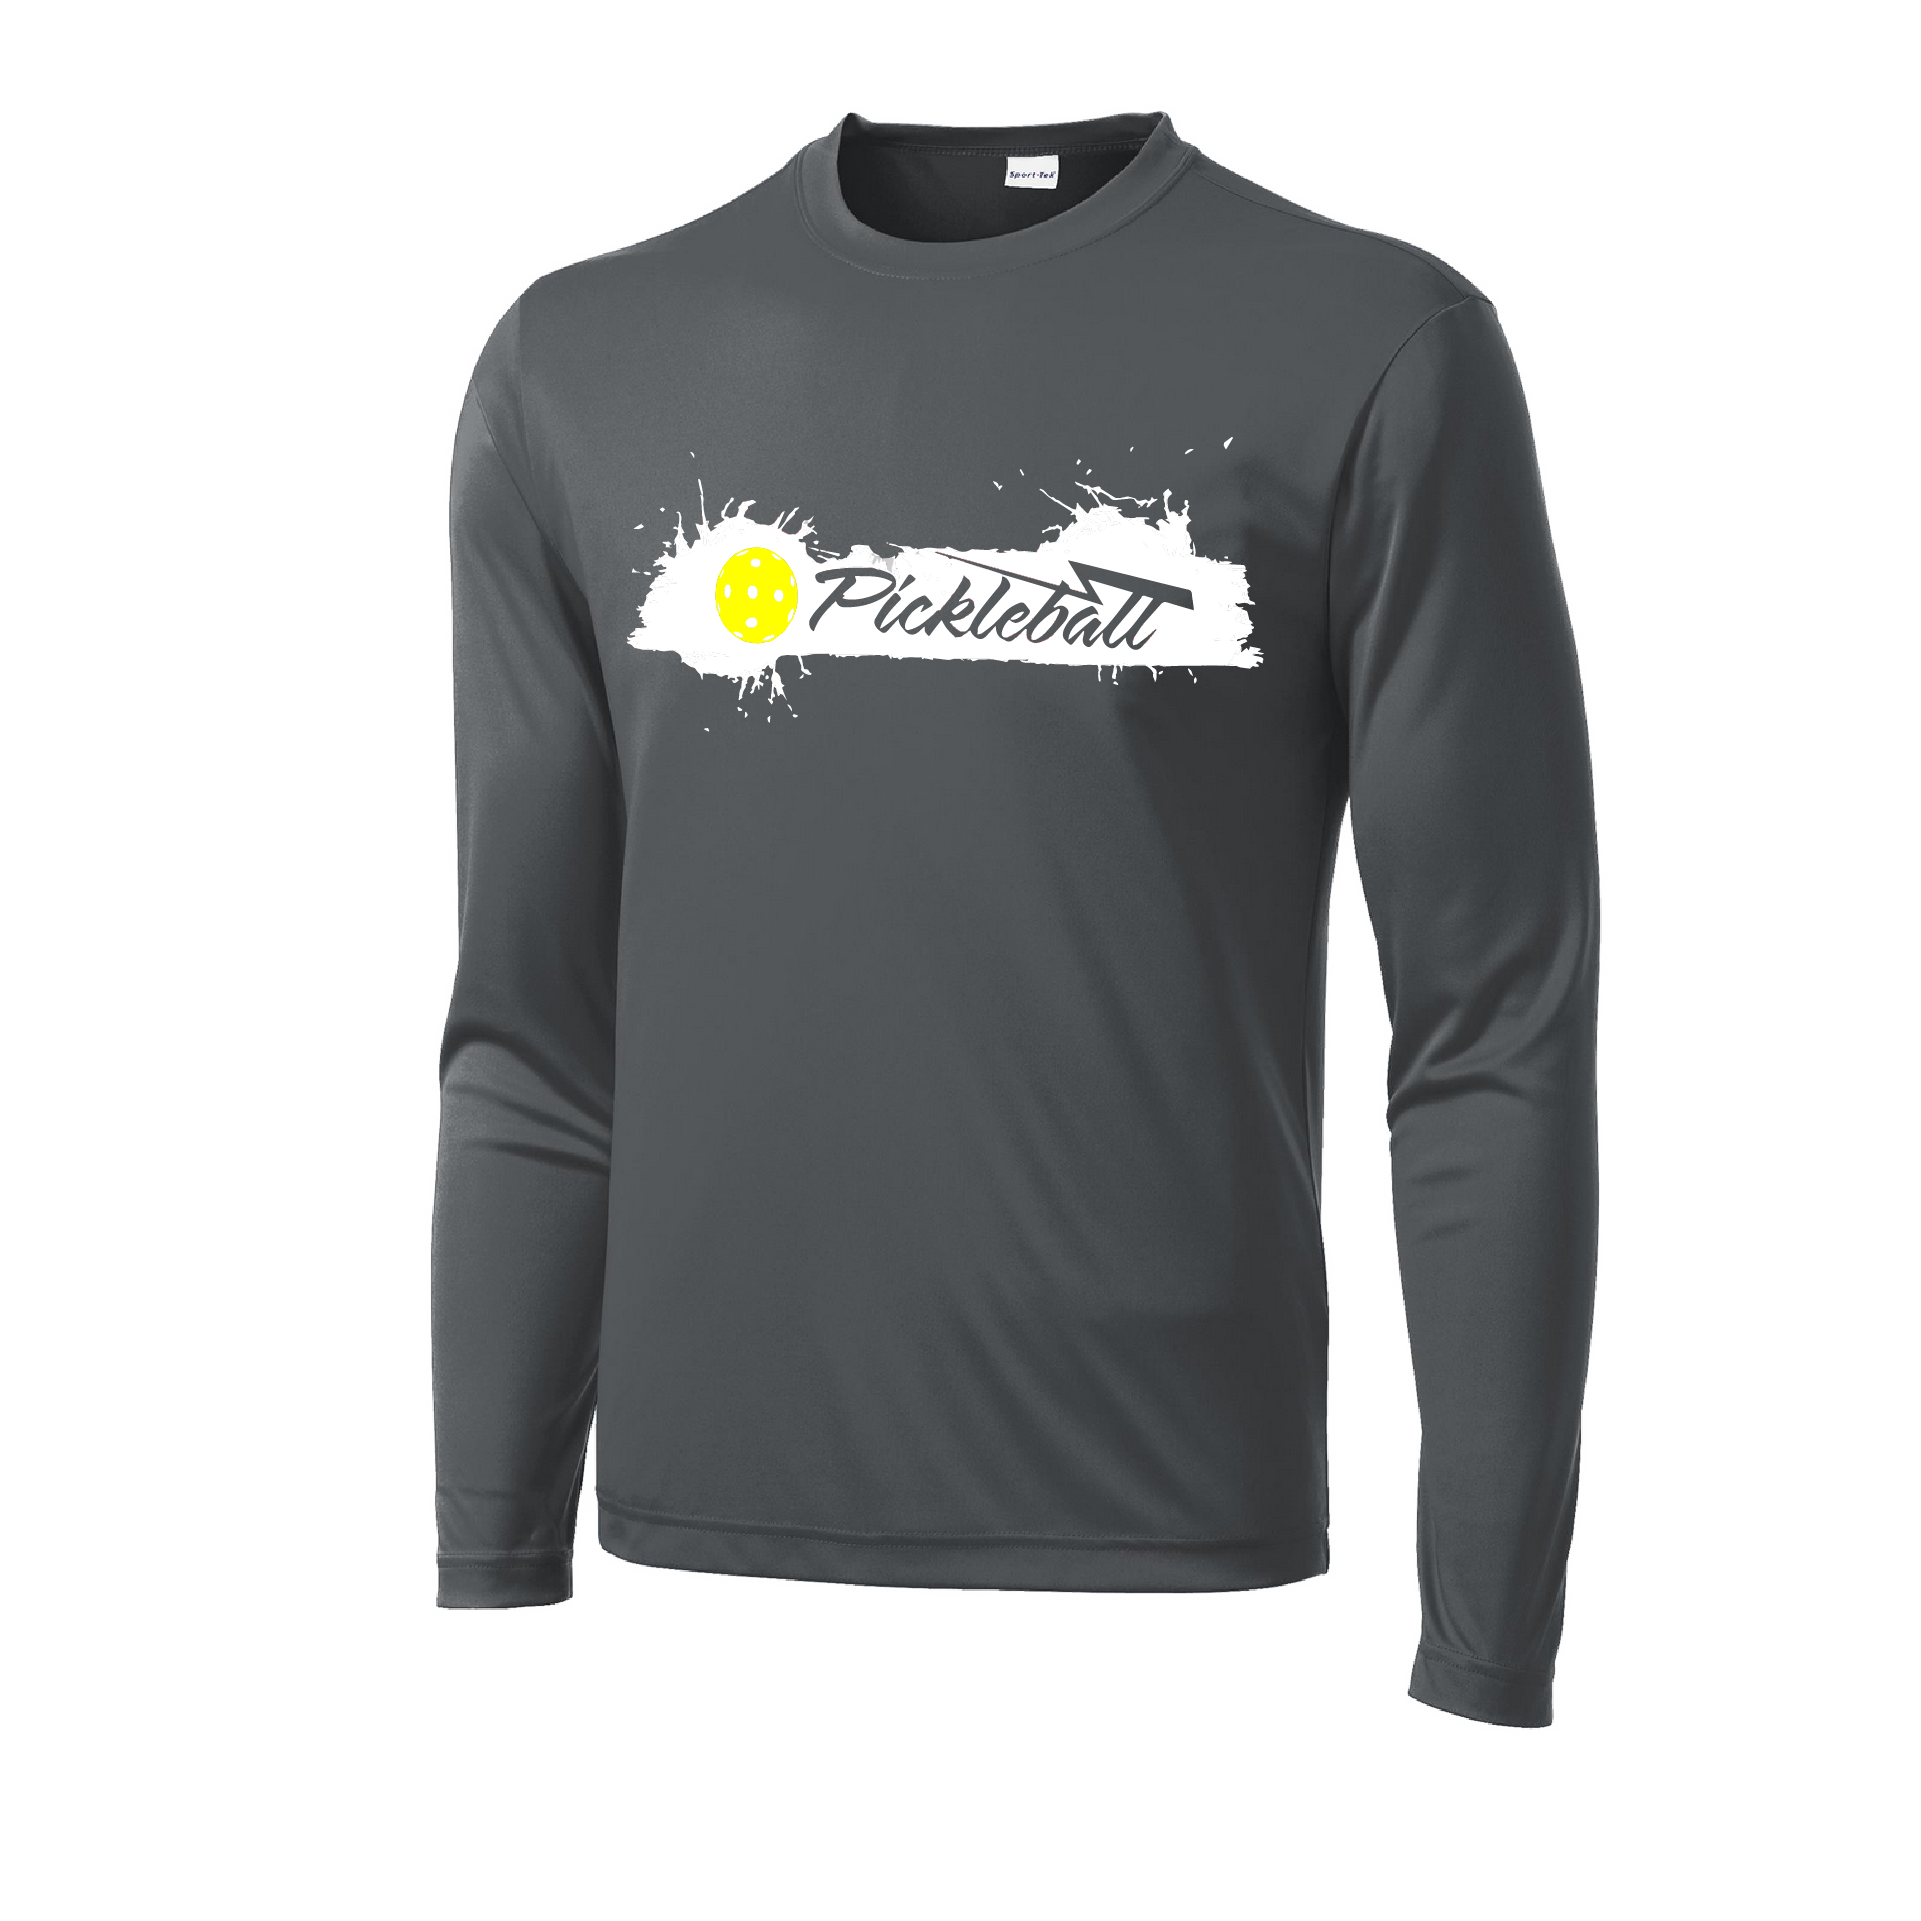 Pickleball Design: Extreme  Men's Style: Long Sleeve  Shirts are lightweight, roomy and highly breathable. These moisture-wicking shirts are designed for athletic performance. They feature PosiCharge technology to lock in color and prevent logos from fading. Removable tag and set-in sleeves for comfort.